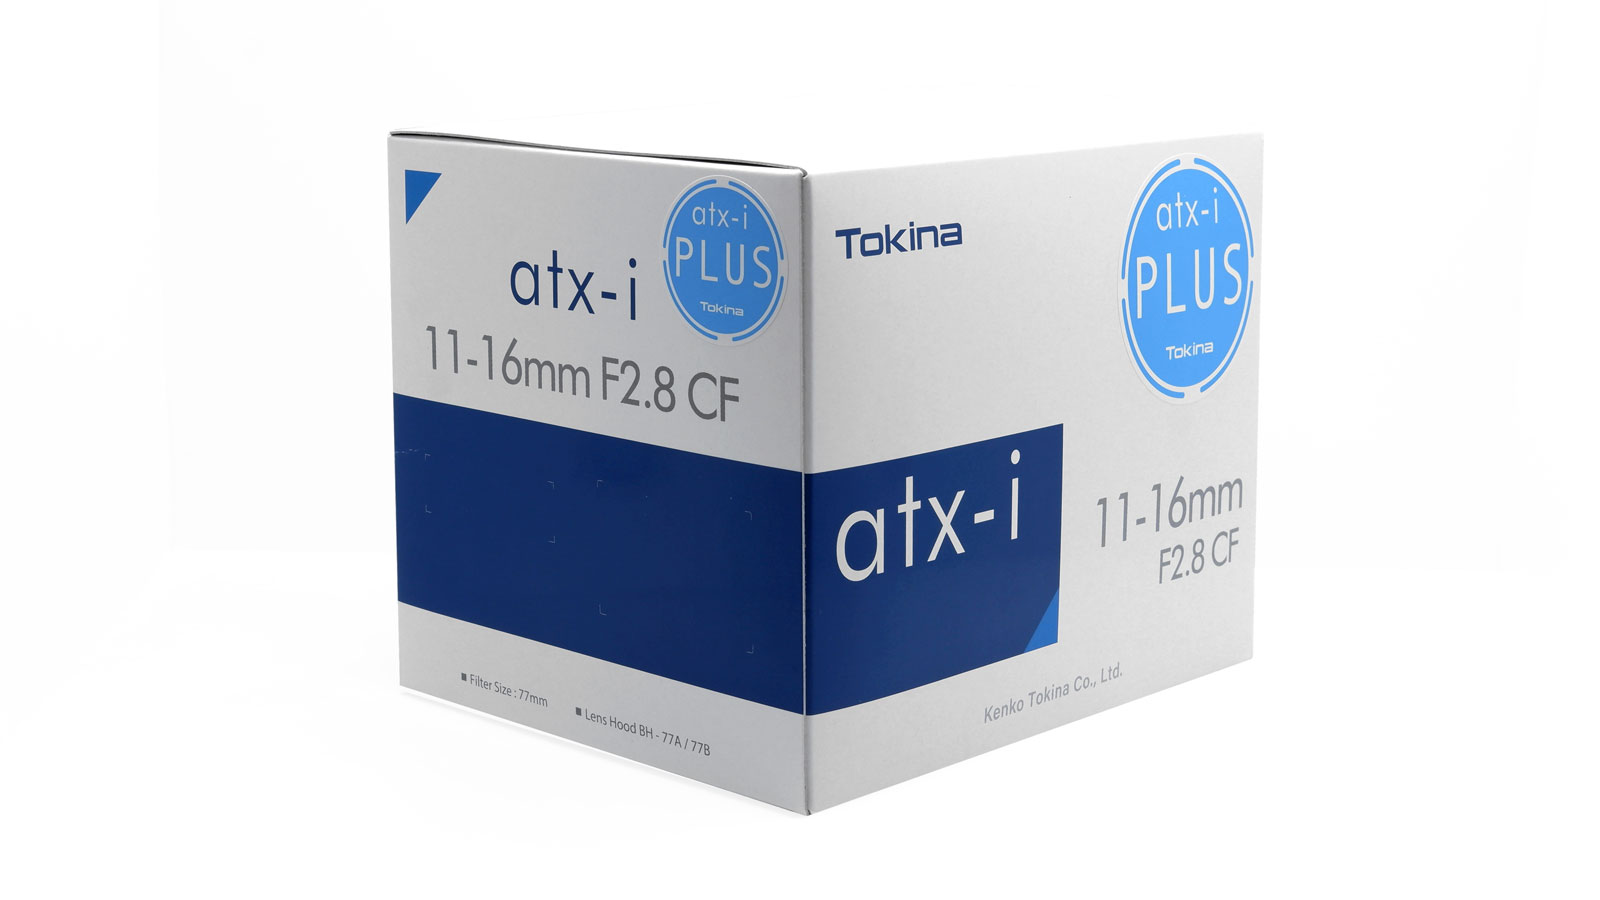 Tokina atx-i series package with "PLUS" seal.